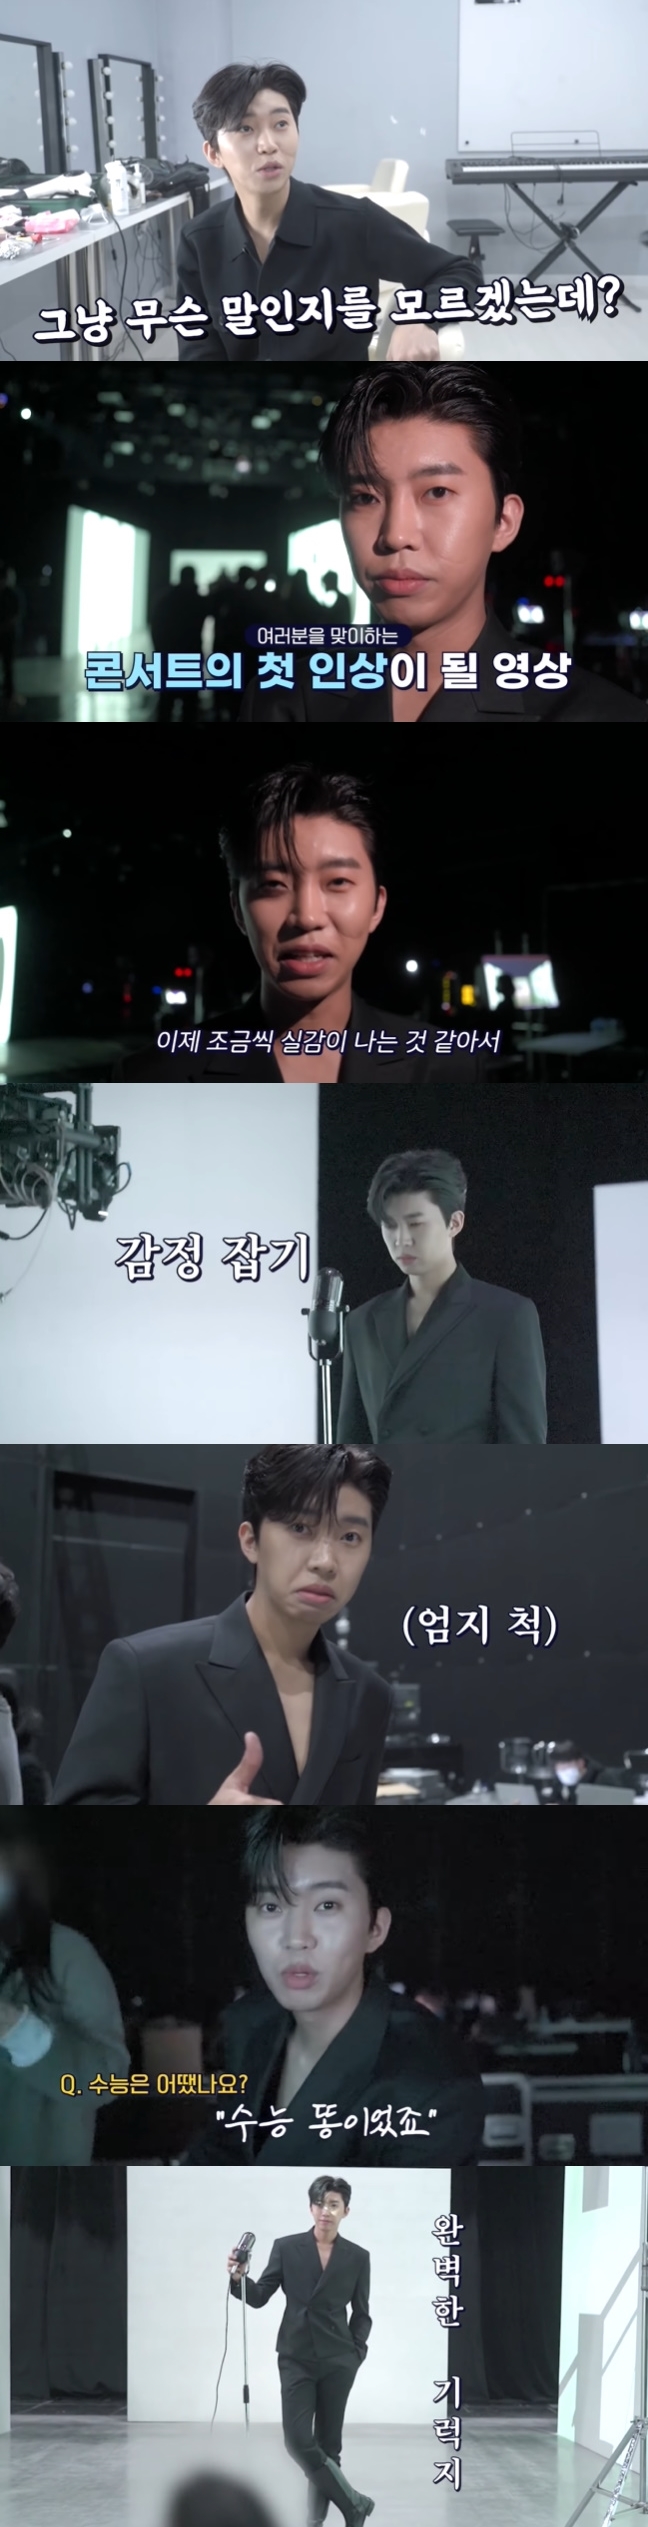 Lim Young-woong has released a solo concert teaser shooting scene and raised expectations for the performance.On April 9, Lim Young-woongs official YouTube channel Lim Young-woong will finally meet!IM HERO Concert teaser shoot behind the scenes .The video shows Lim Young-woongs Concert teaser shooting scene.In the waiting room, Lim Young-woong exploded a high note, sang several pops, and showed a full-on Settai, pretending to play guitar.Lim Young-woong said, You have to speak English.I am studying English because of the global era. As soon as I started to say a simple greeting in English, I was speechless and laughed.In the British pronunciation introduced by Lim Young-woong, the staff showed YouTube videos that show British pronunciation.Lim Young-woong seemed to have buffered, saying, I do not know what you mean.Lim Young-woong, who was preparing to shoot, said, Today, I am shooting a concert teaser video.This is the first time fans and those who come to see Concert images. The atmosphere is not Settai.Feelings seem to be getting a little closer to the Concert now, so it is so cool. The shooting began and Lim Young-woong checked the bracelet details, grabbed the emotions and made a charismatic look.Lim Young-woong, who monitored his appearance, admired it as feelings like pop singers.Lim Young-woong, who was talking with the staff on bracelets, said, I memorized and tested the old days of the element symbol.It was before Interstellar, he explained.When asked about the SAT scores, Lim Young-woong said, It was a poop. High school went well. I think I had a little distance from studying because I aimed at practical music.I was just trying to concentrate on music.